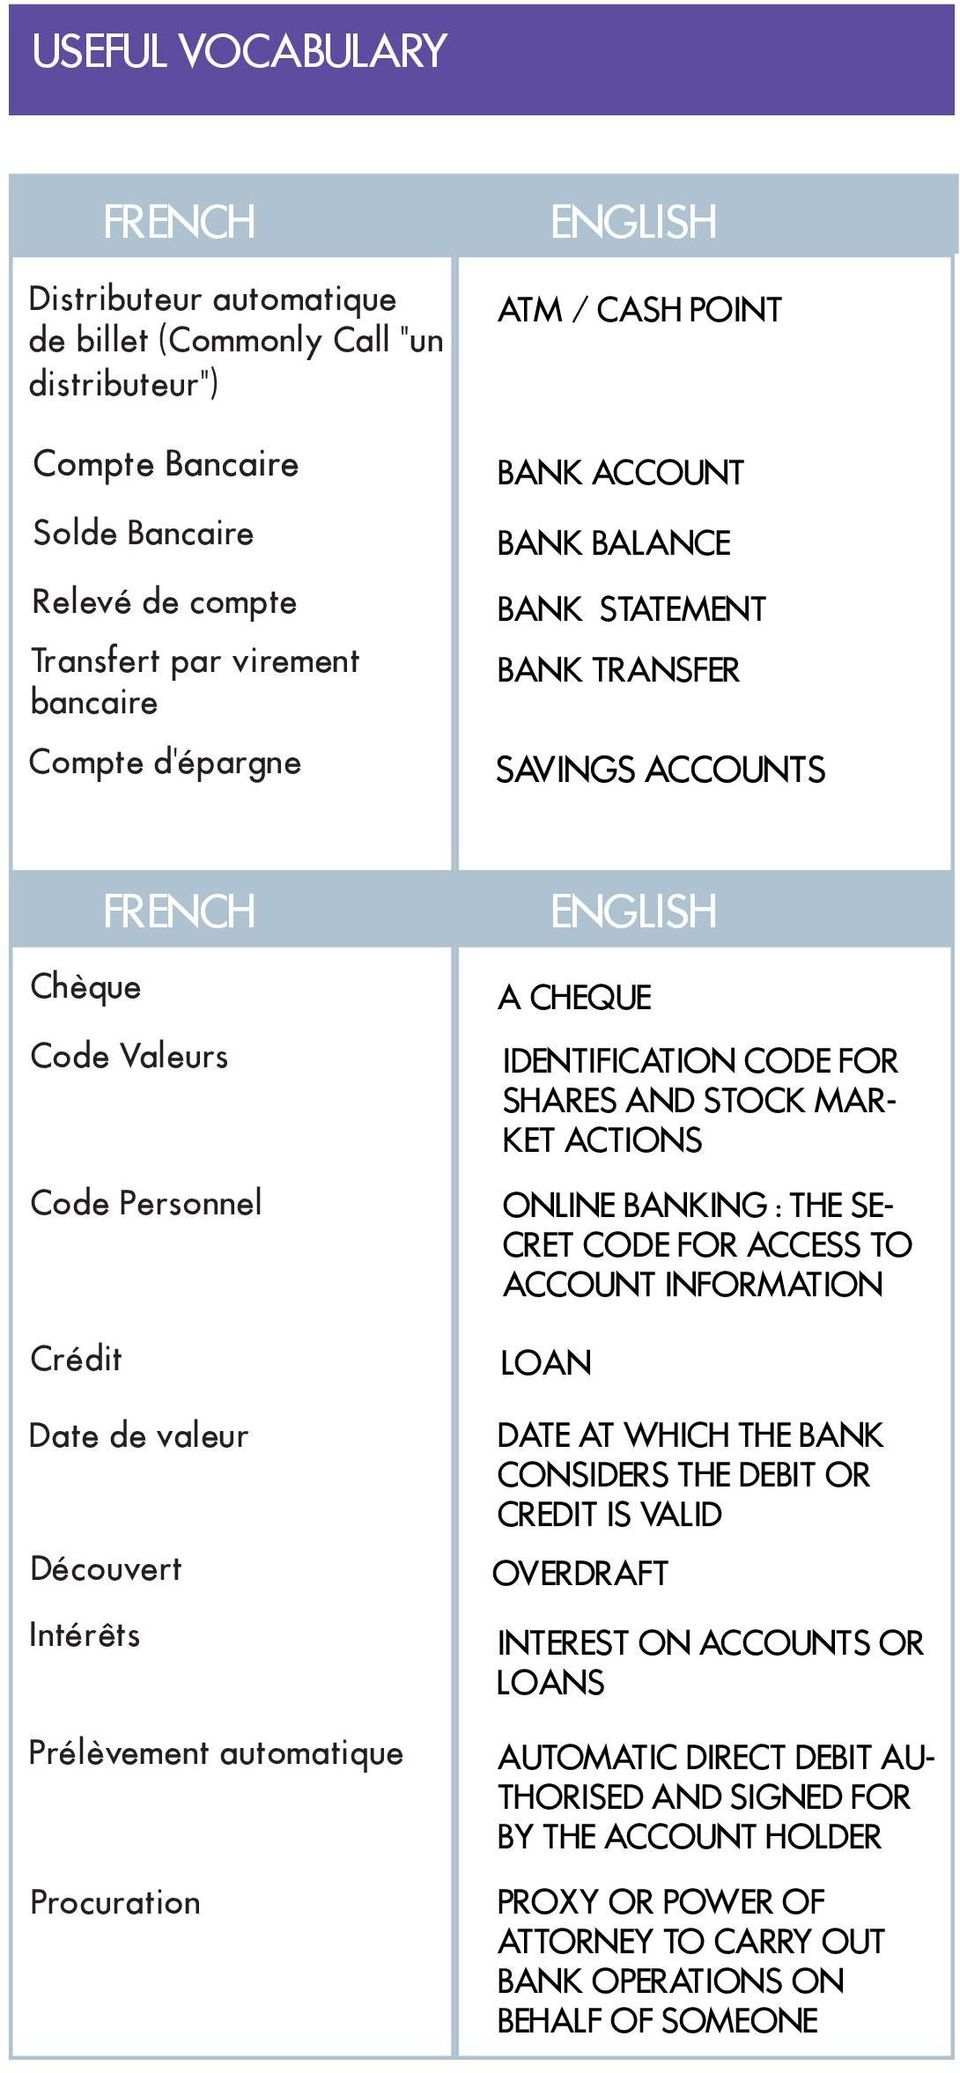 Prélèvement automatique Procuration ENGLISH A CHEQUE IDENTIFICATION CODE FOR SHARES AND STOCK MAR- KET ACTIONS ONLINE BANKING : THE SE- CRET CODE FOR ACCESS TO ACCOUNT INFORMATION LOAN DATE AT WHICH